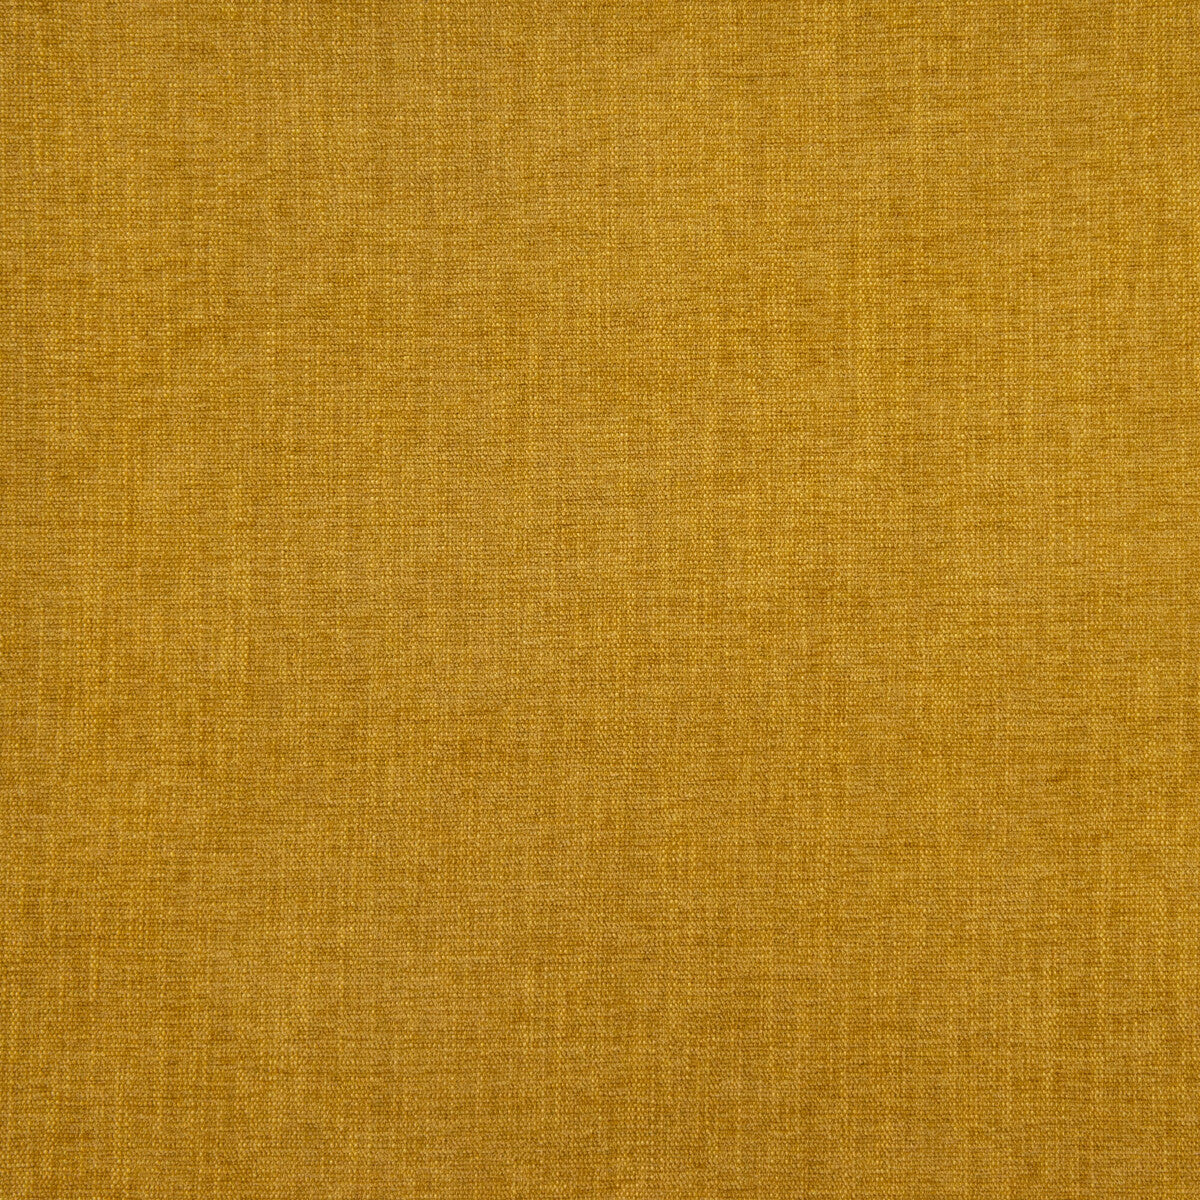 Moro fabric in oro viejo color - pattern GDT5670.026.0 - by Gaston y Daniela in the Gaston Maiorica collection